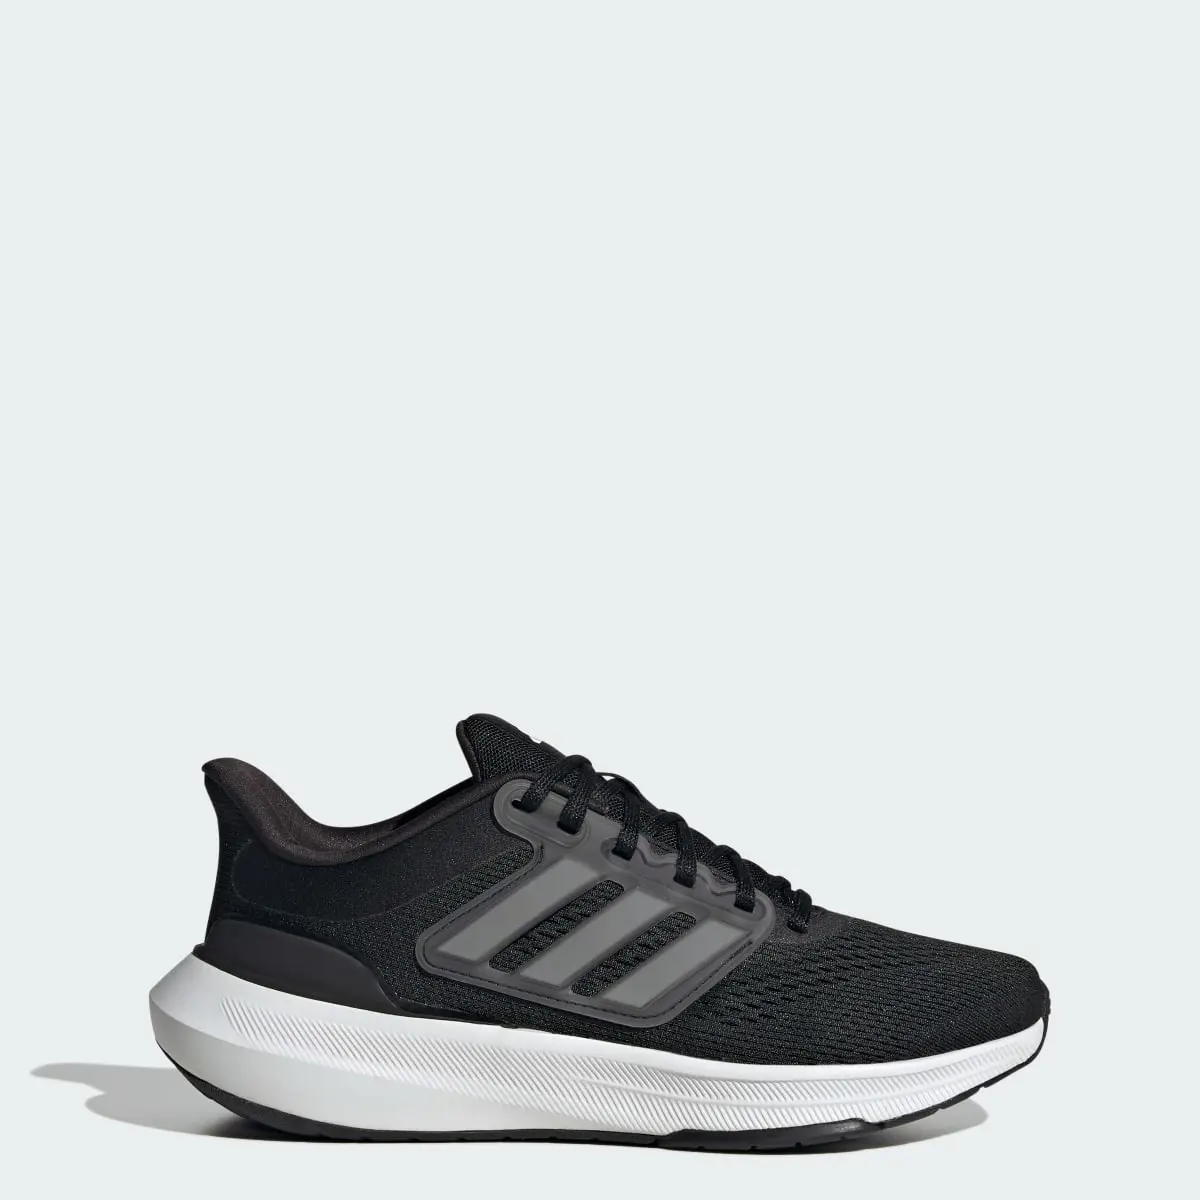 Adidas Chaussure Ultrabounce Chaussant large. 1